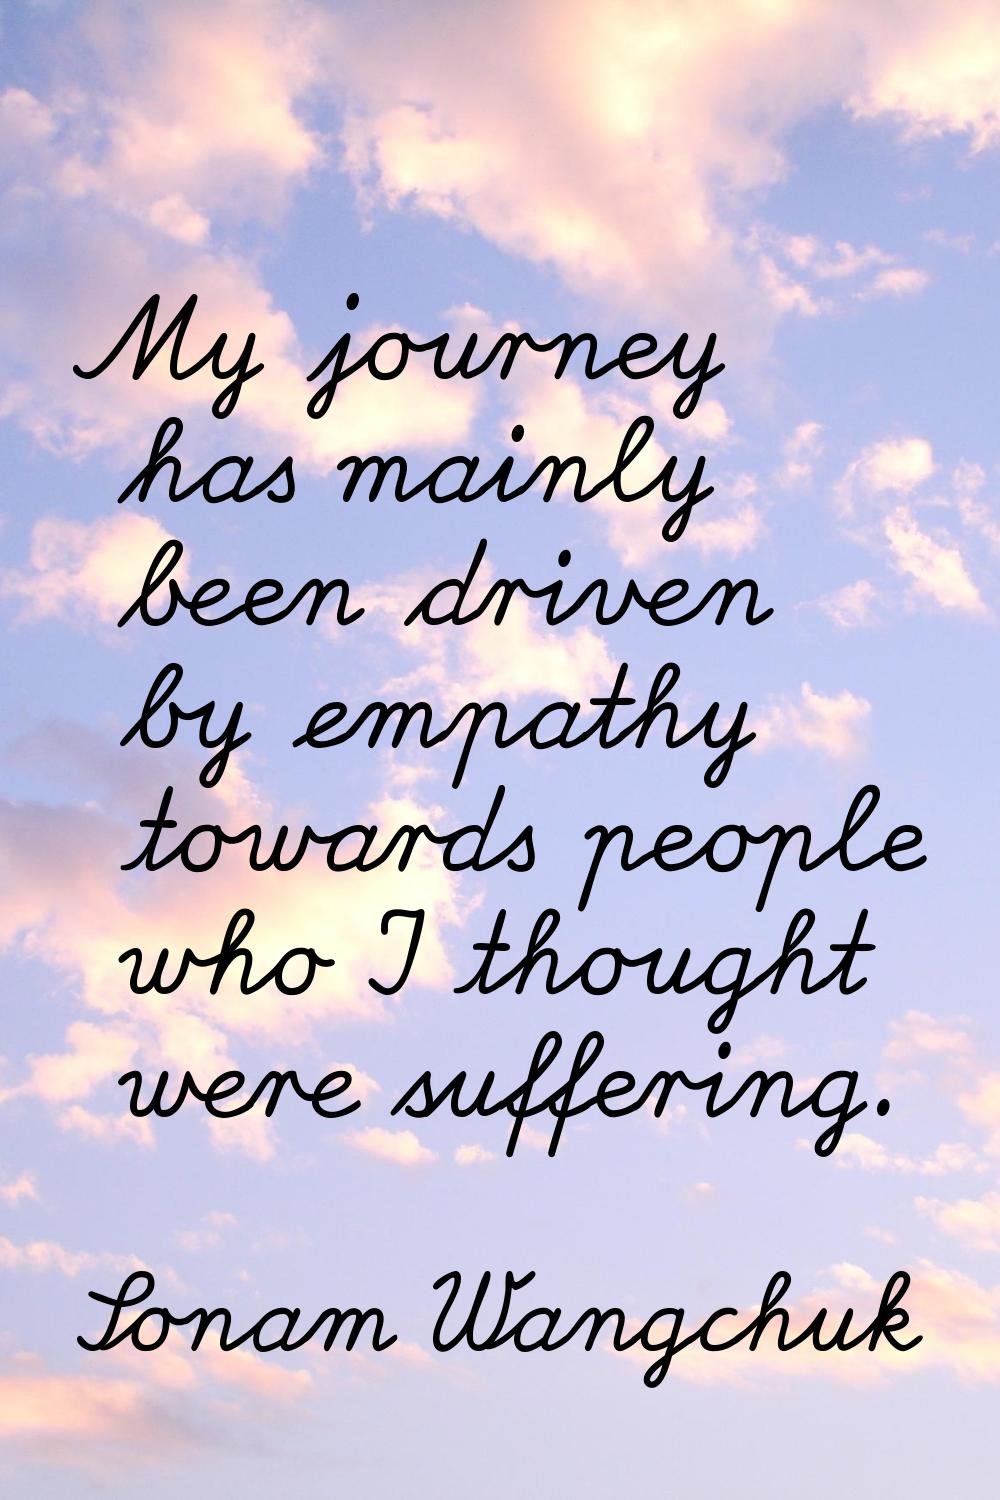 My journey has mainly been driven by empathy towards people who I thought were suffering.